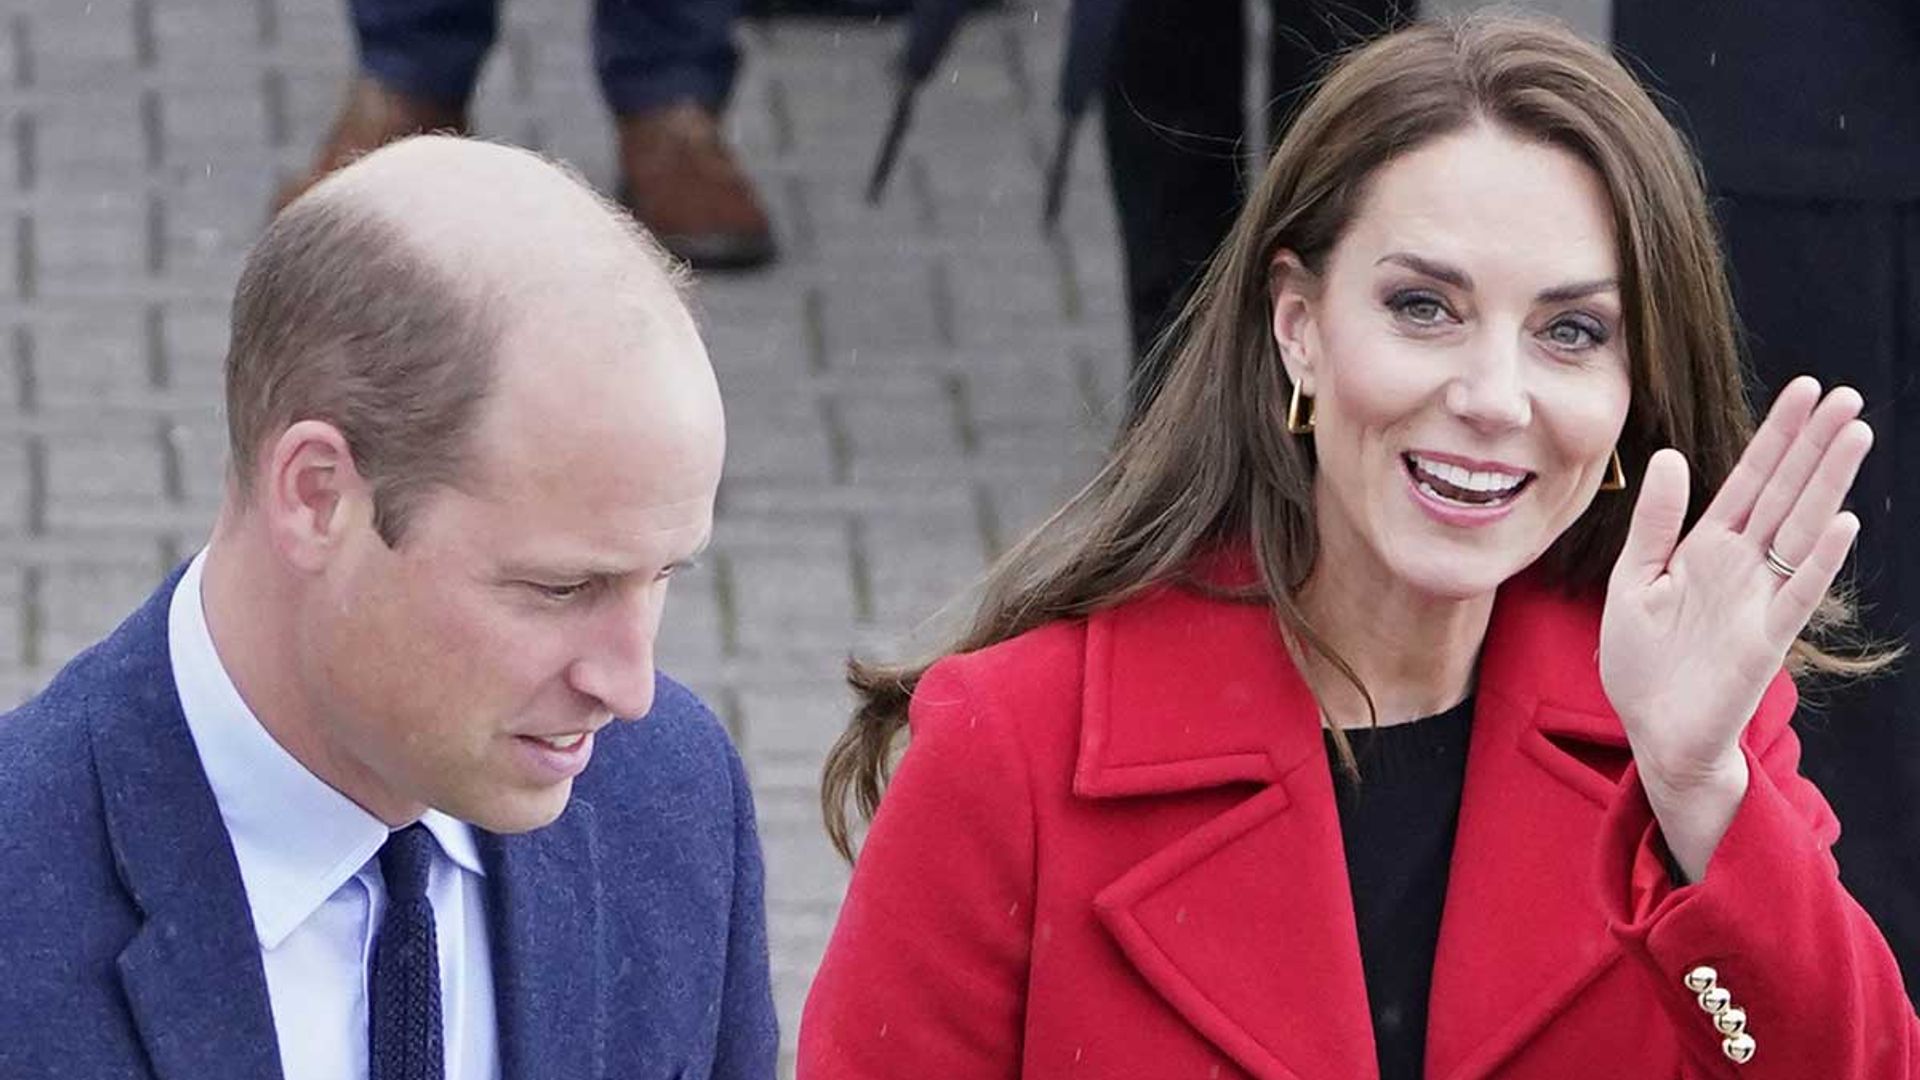 kate william wales pic